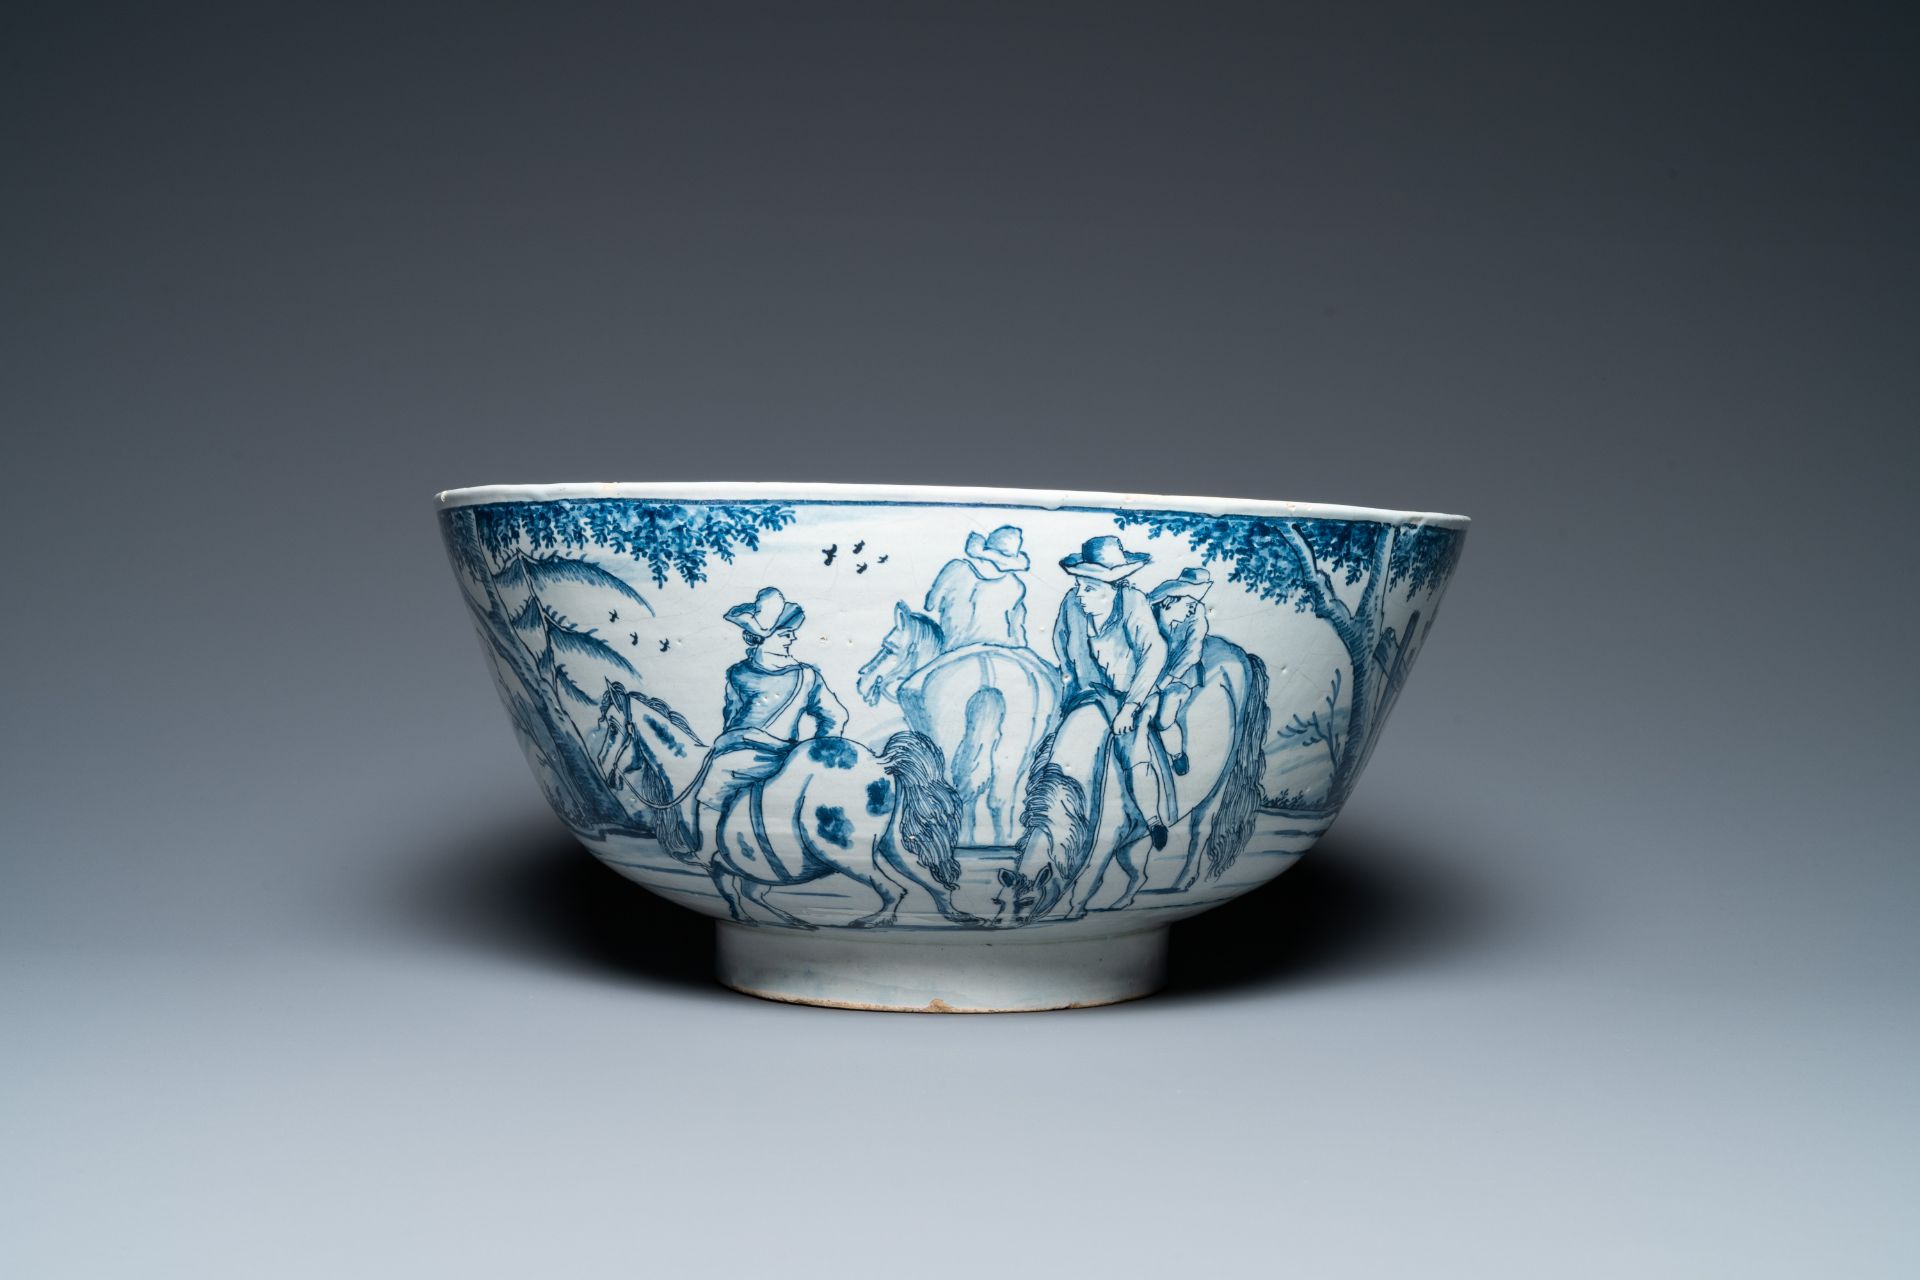 A large Dutch Delft blue and white bowl with shepherds on horsebacks, 18th C. - Image 3 of 9